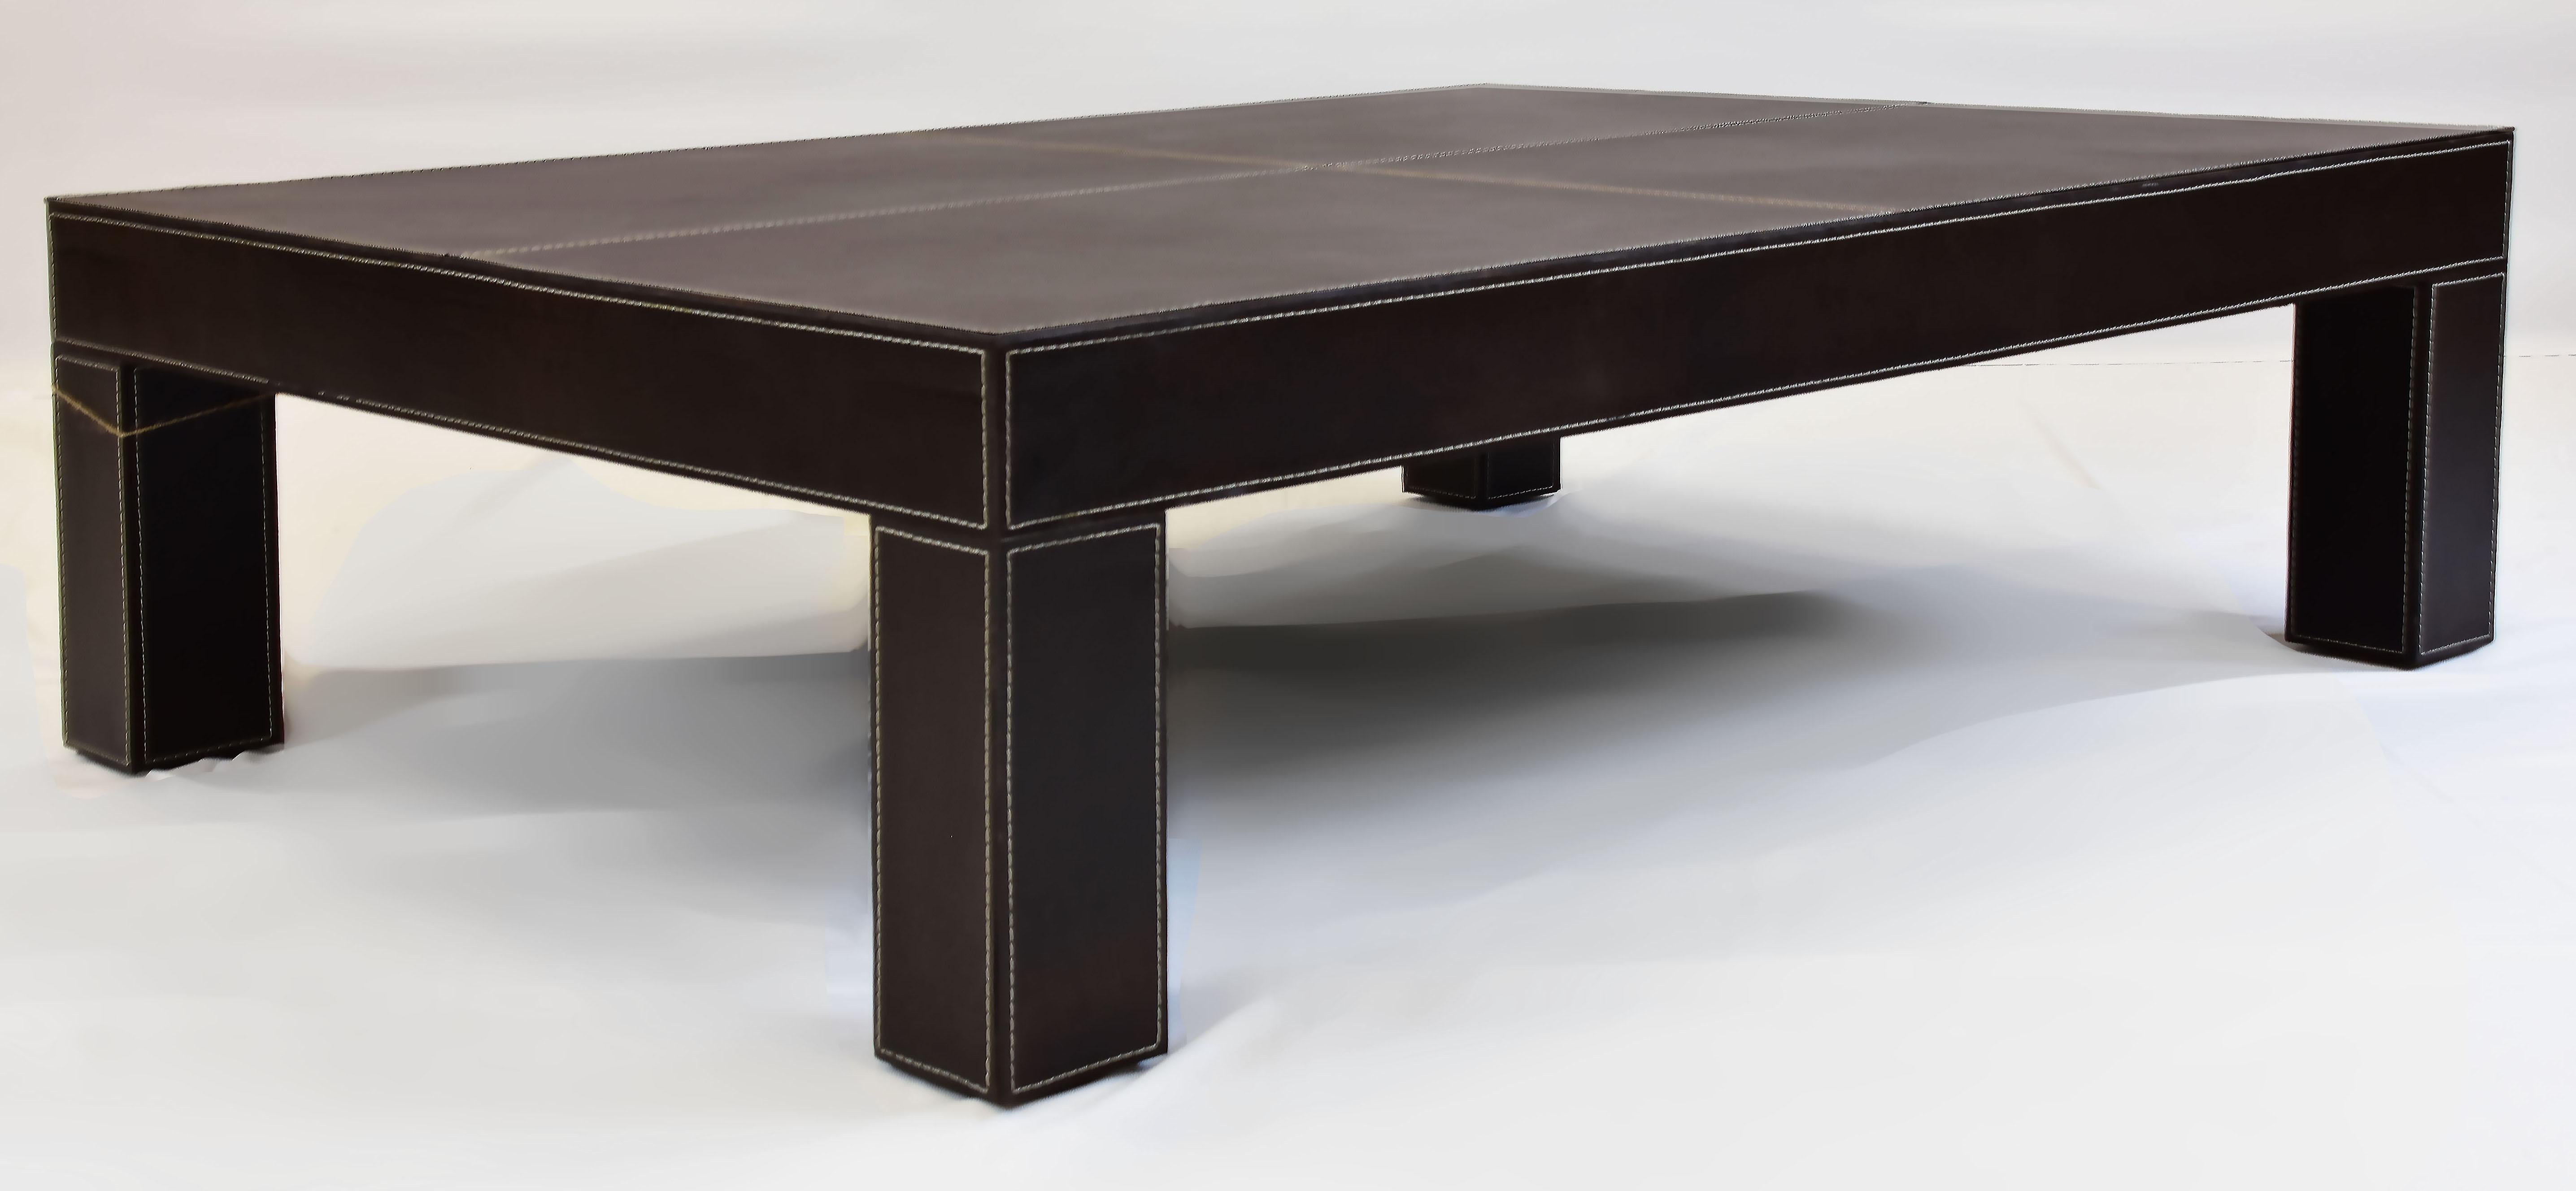 Le Jeune Upholstery Saddle Up Leather Coffee Table Showroom Model

Offered for sale is a  Le Jeune Upholstery SADDLE UP stitched leather clad coffee table showroom model.	The cocktail table is covered in a thick premium dark brown saddle leather,